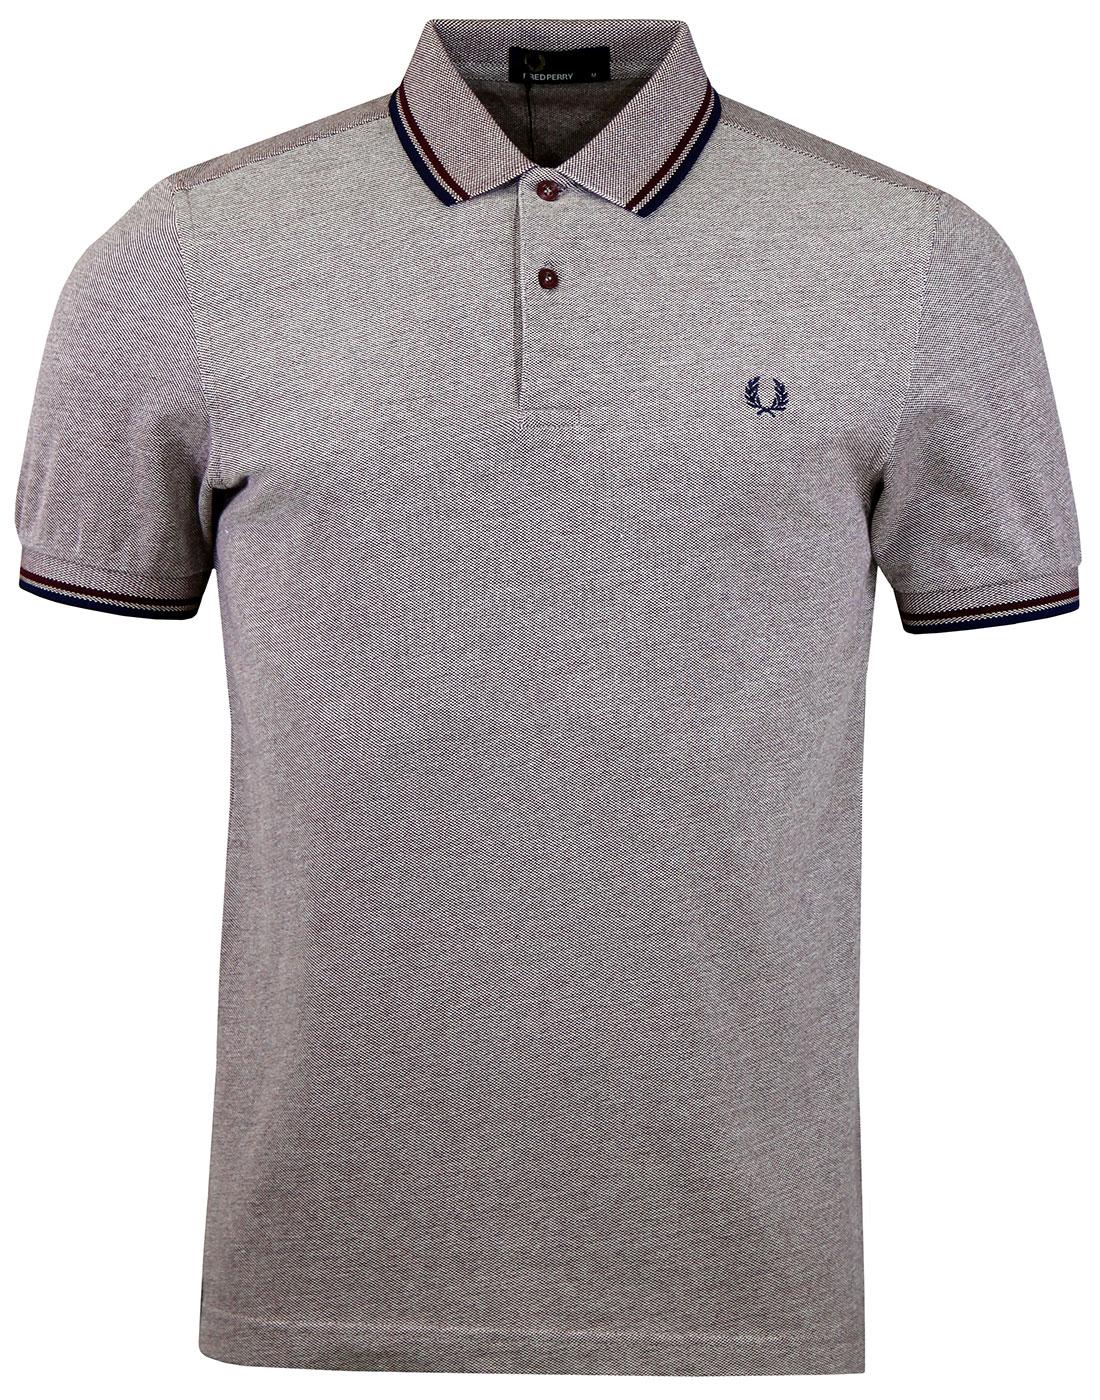 FRED PERRY Mens Twin Tipped Polo Shirt in Mahogany/Oxblood